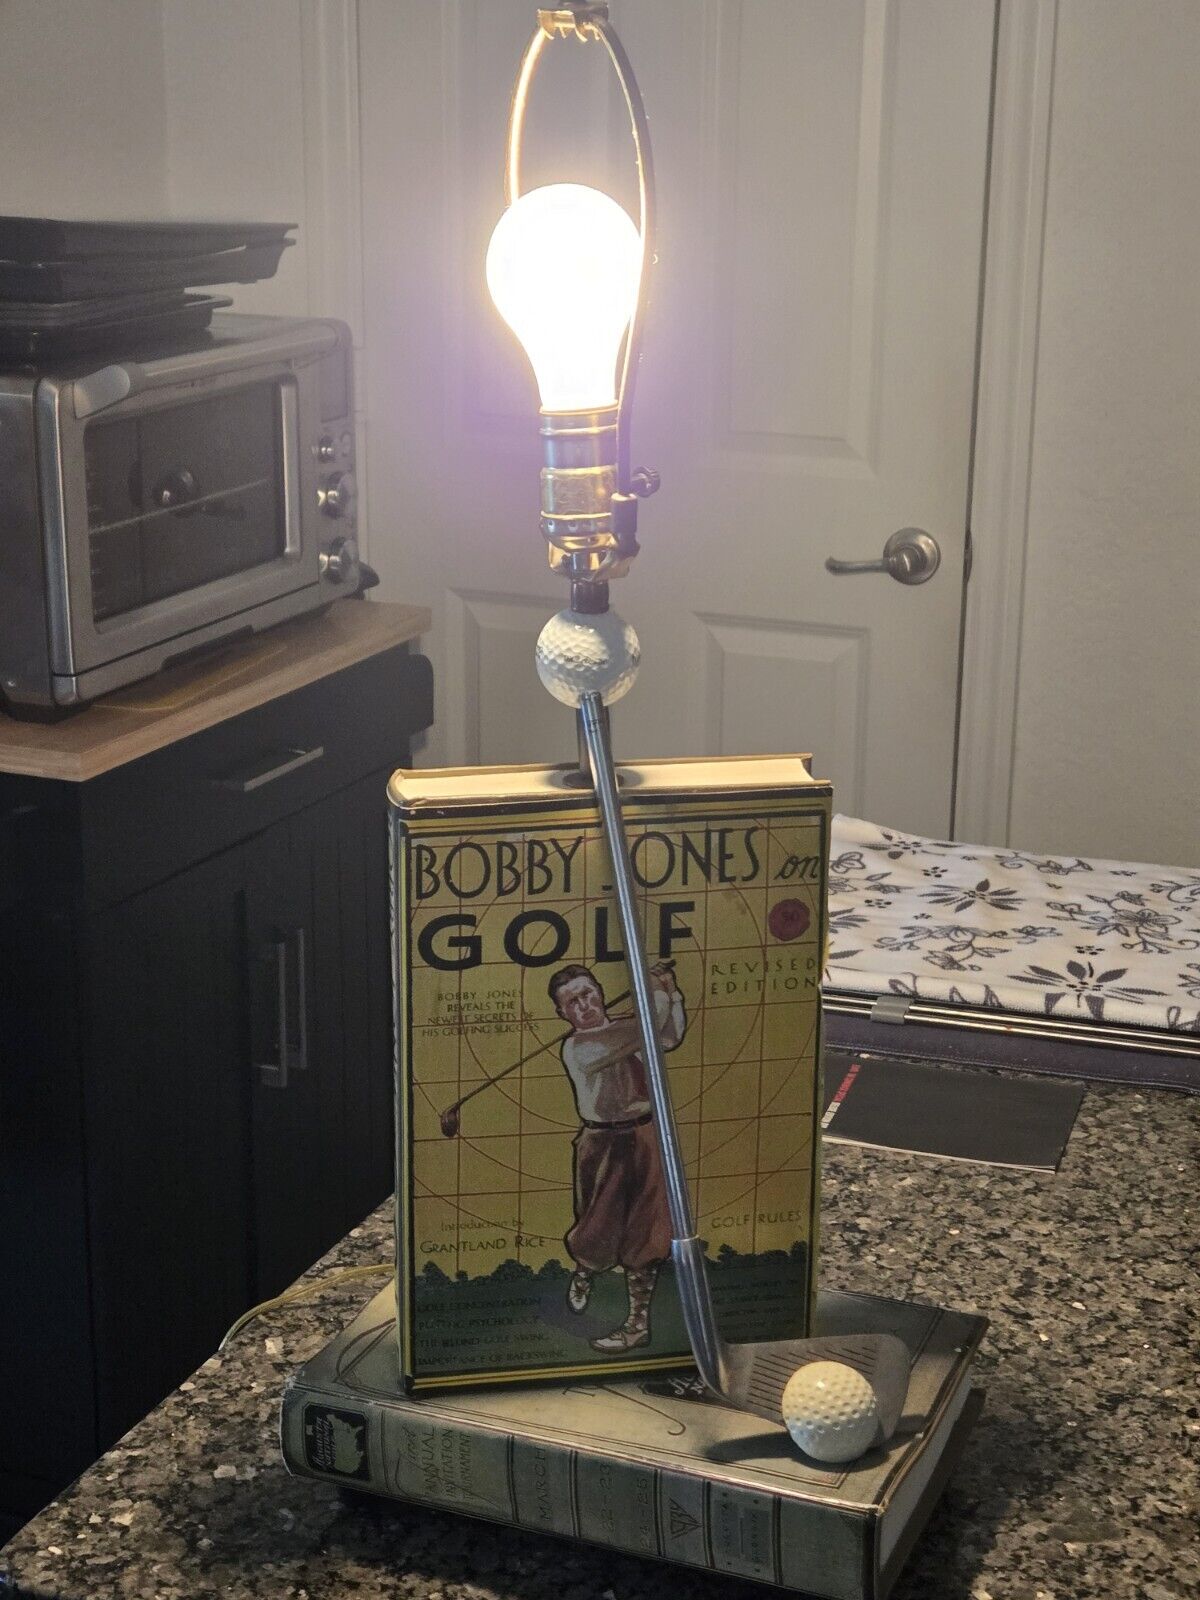 Vintage Bobby Jones Golf Lamp Lamps and More of West Palm Beach Golfing ⛳️ OOAK